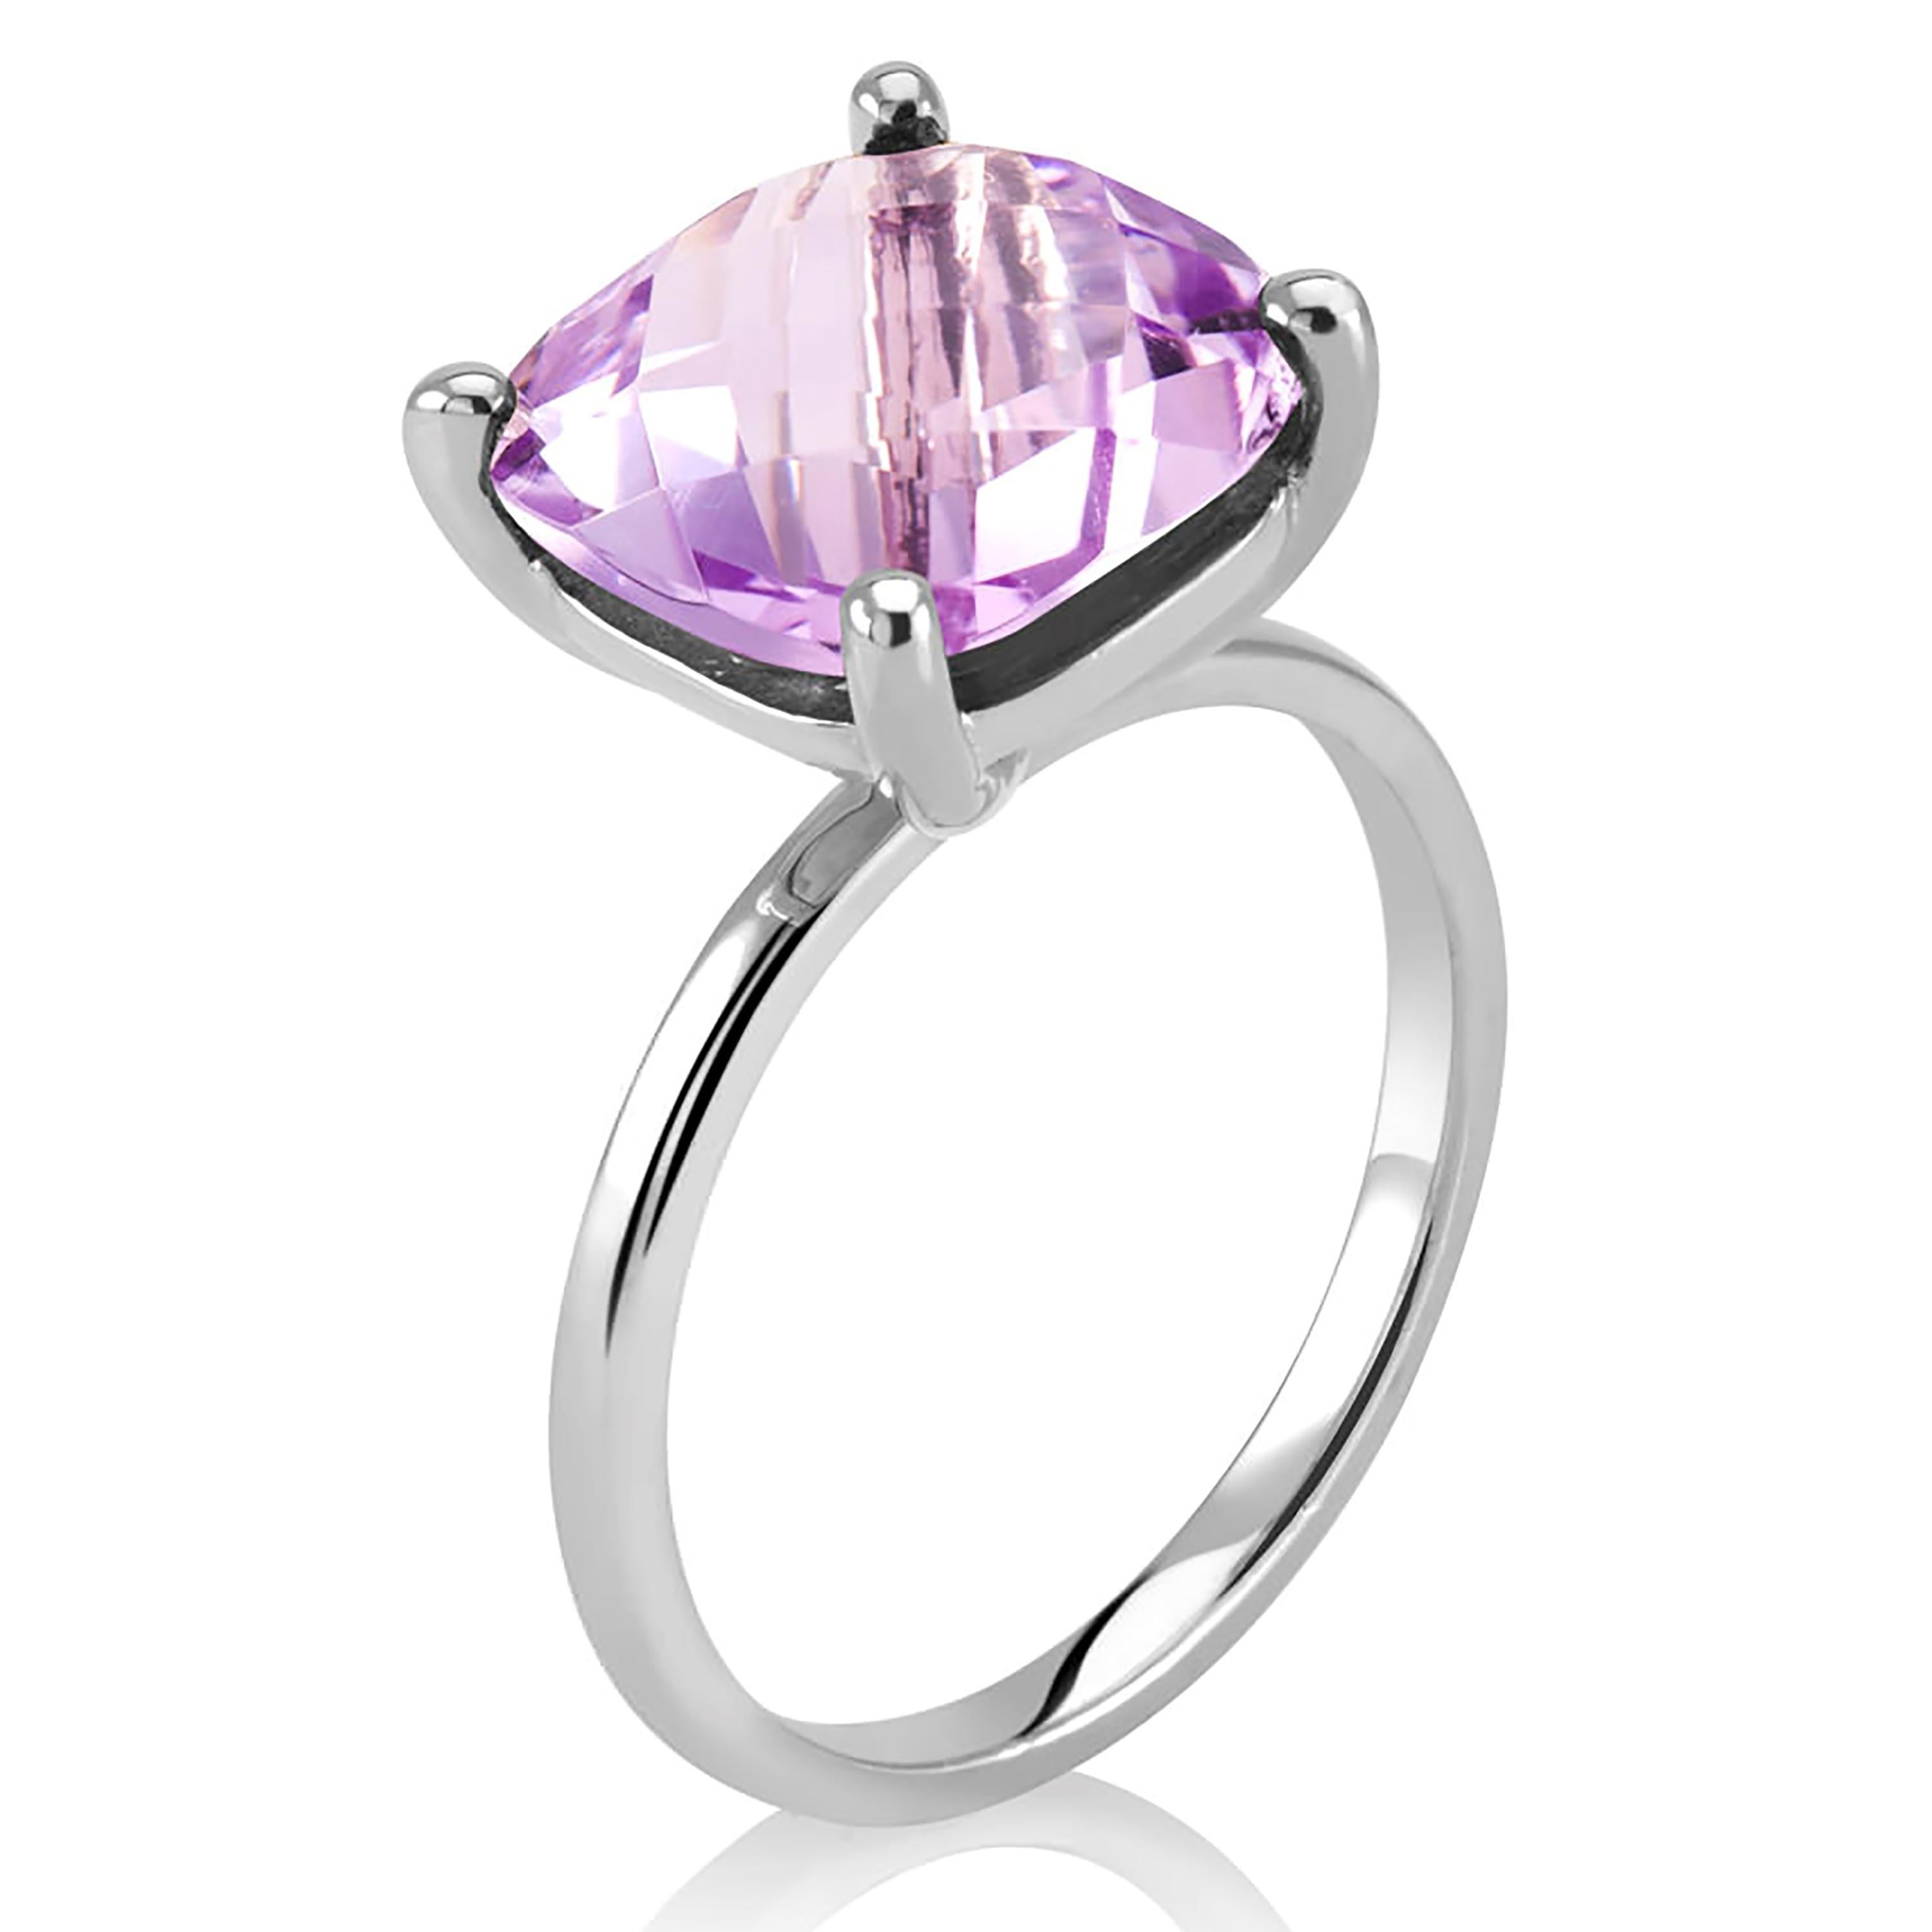 Sterling Silver Solitaire ring 
Cushion amethyst weighing 4 carat
Amethyst measuring 10 millimeter 
Ring finger size 5
New Ring
The ring cannot be resized
White gold plated 
Handmade in the USA
